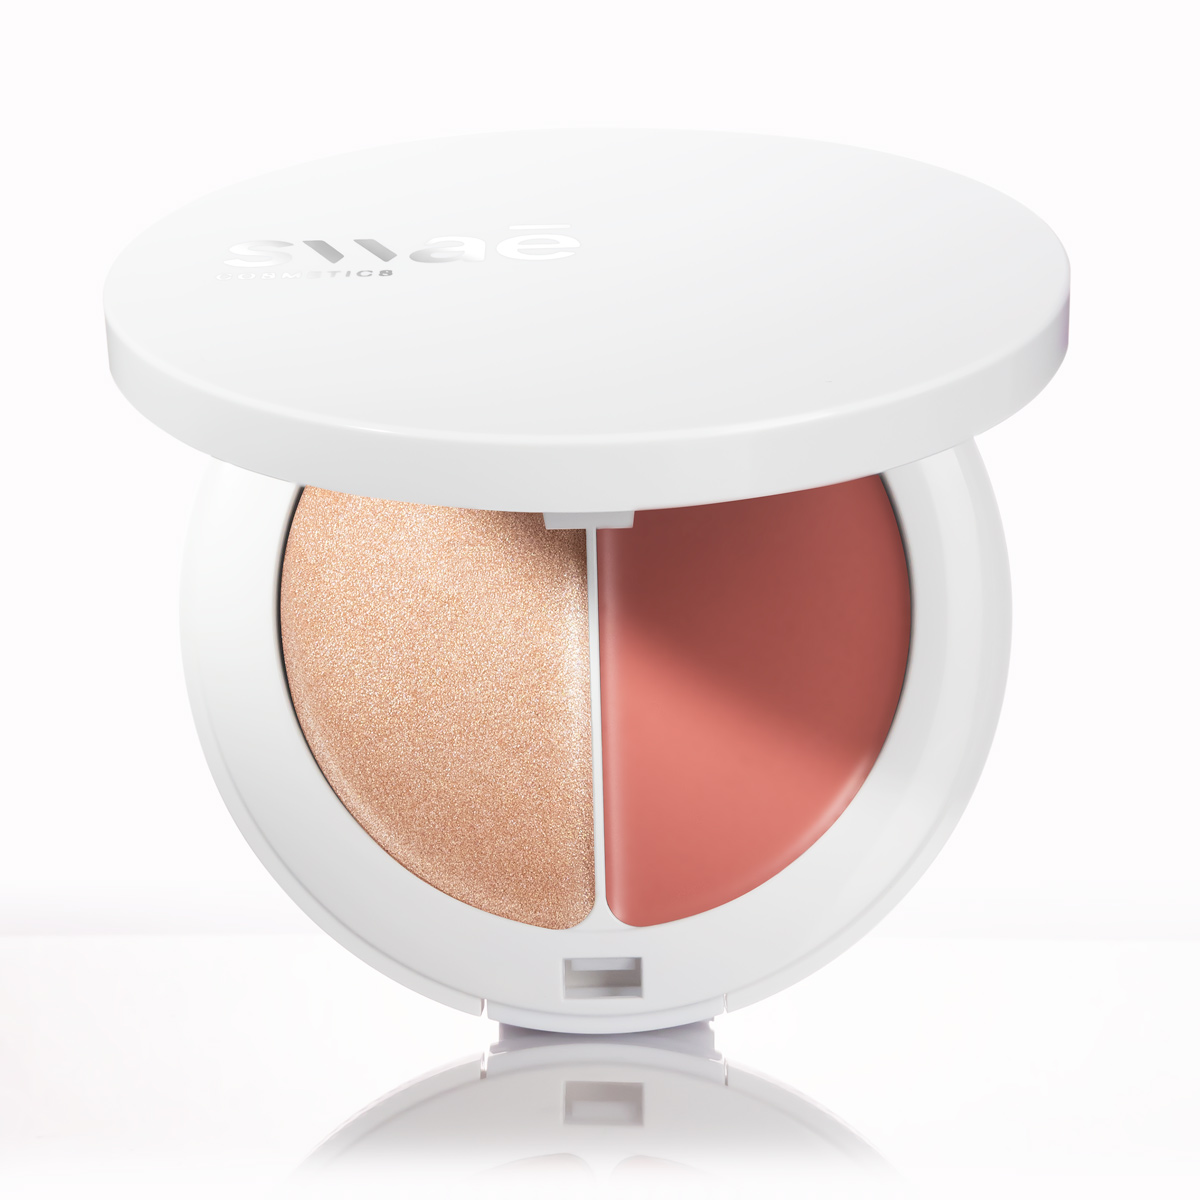 BLUSH HIGHLIGHTER COMBO COLOR: 02 Champagne / Peach